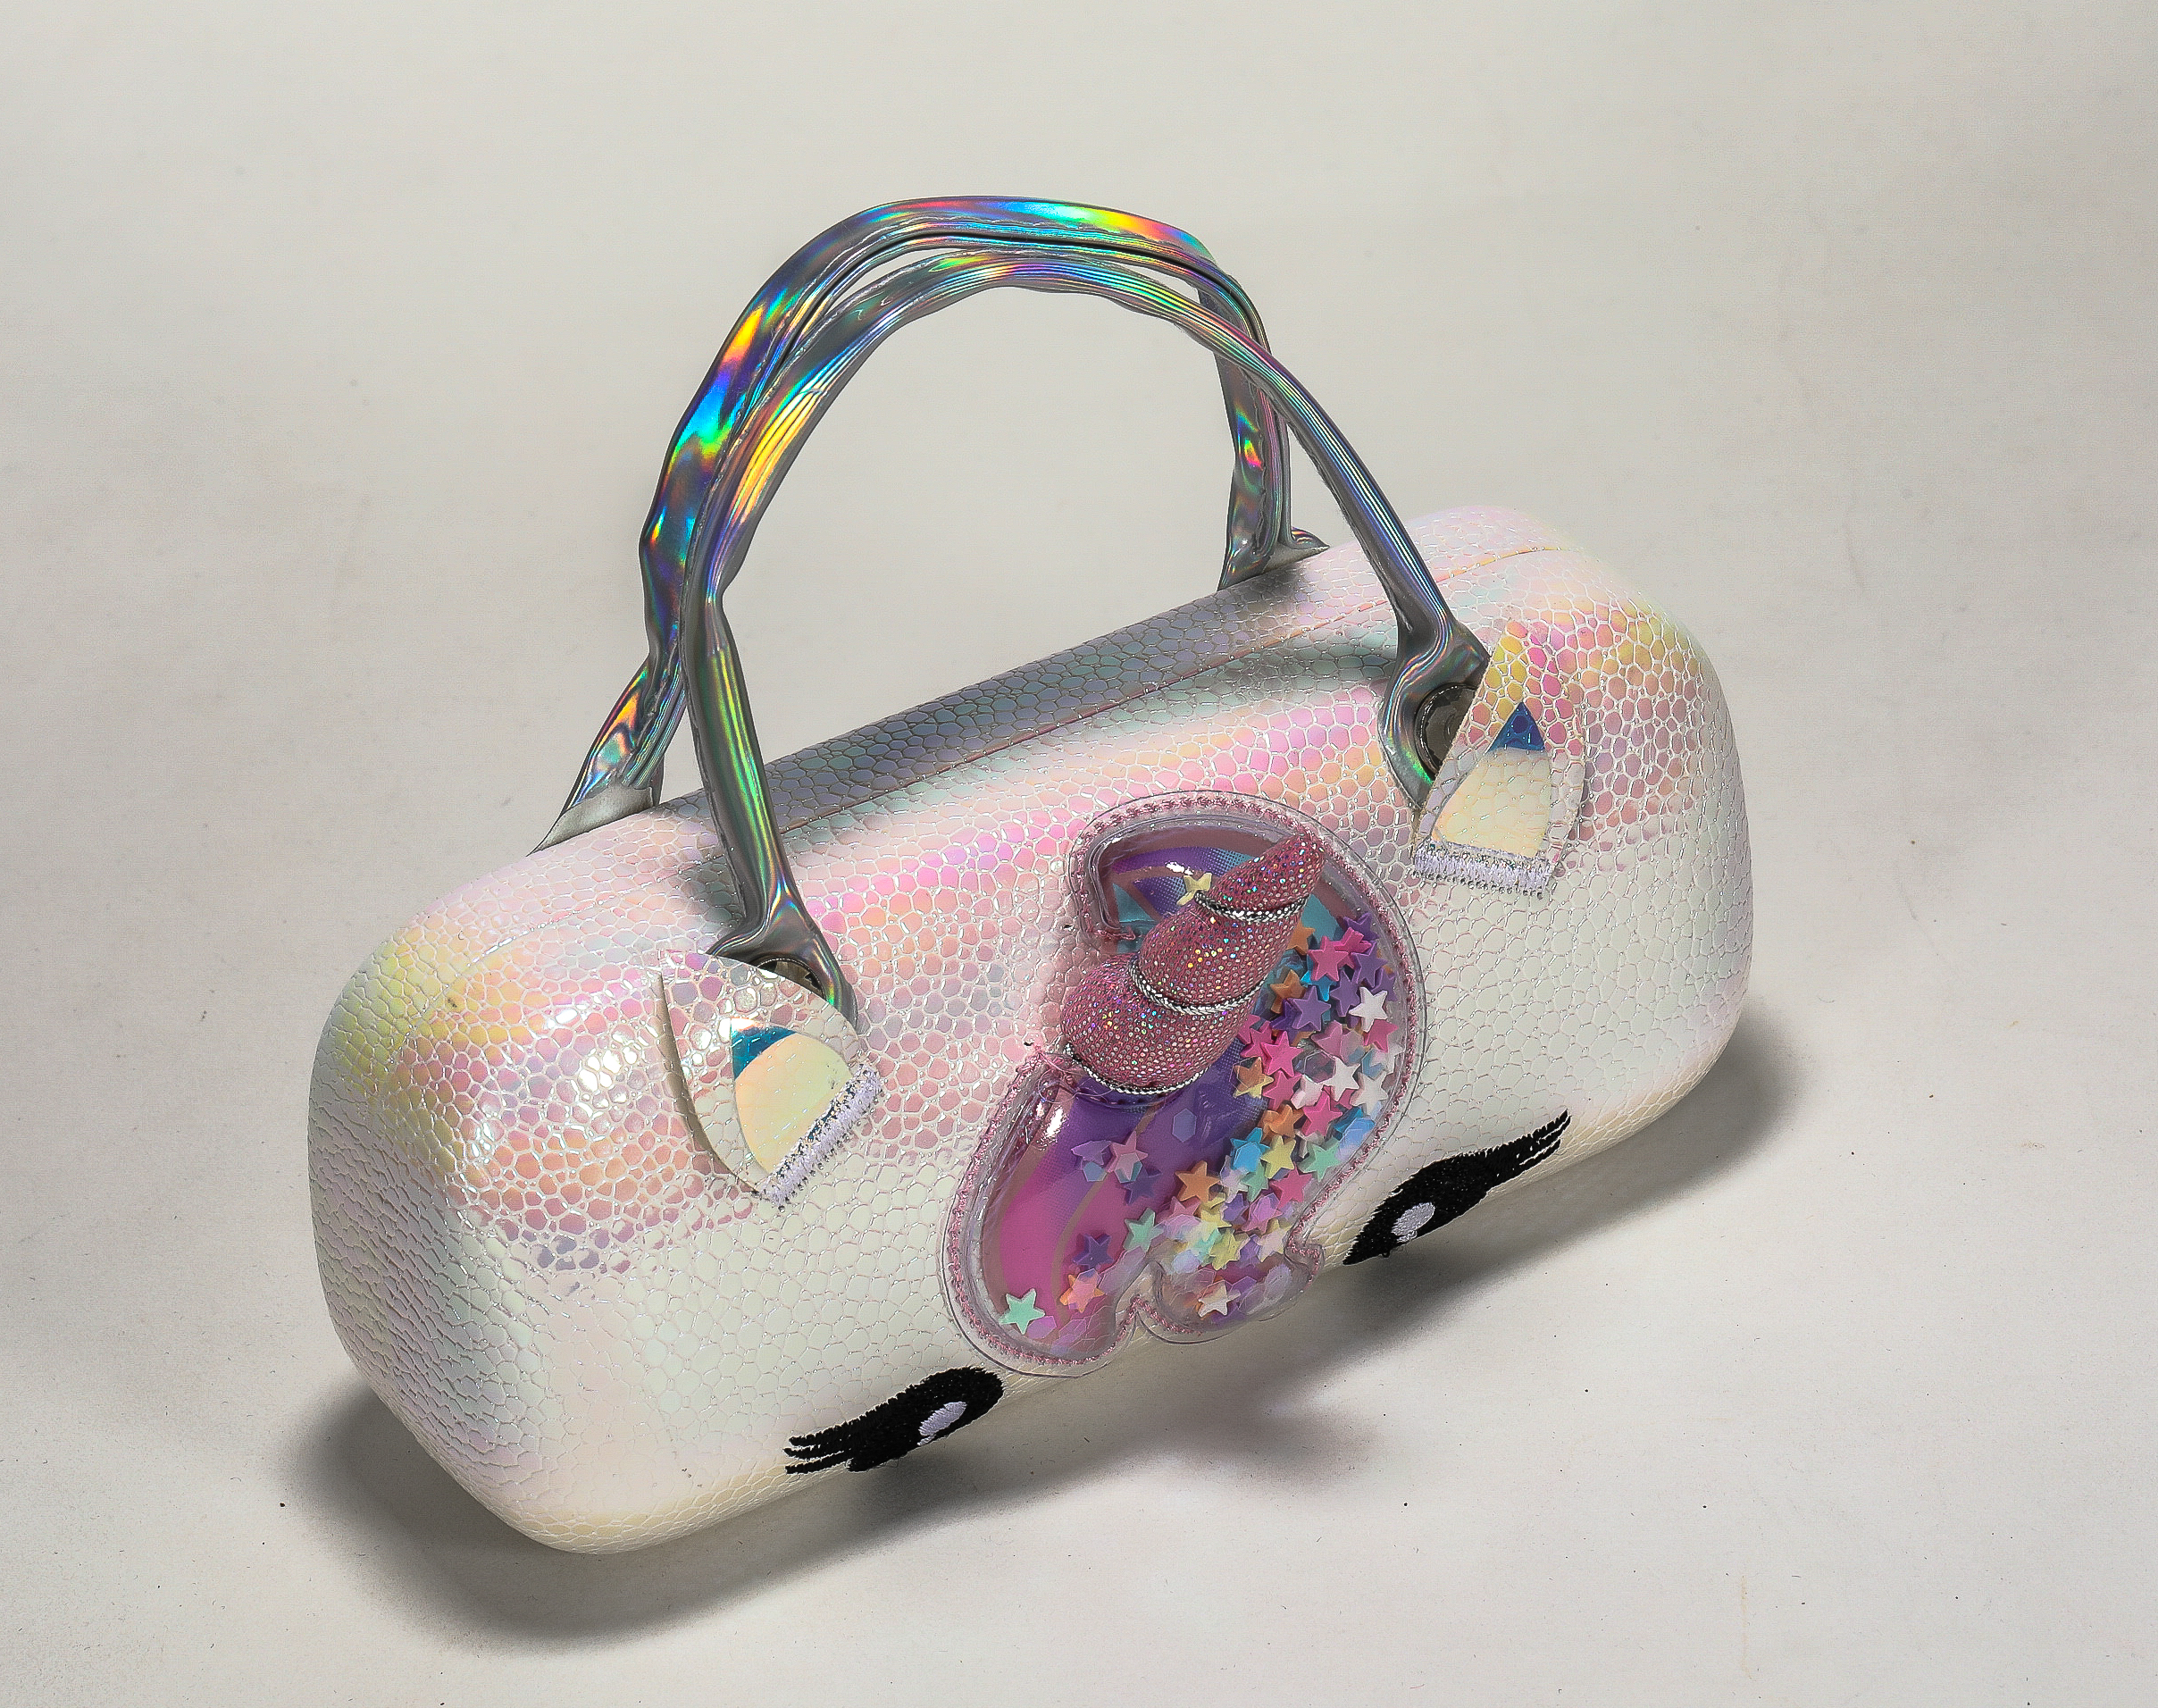 The Sunglasses Case Is A Very Charming And Cute Portable Sunglasses Case Printed with A Unicorn Pattern. Kids Love It Very Much